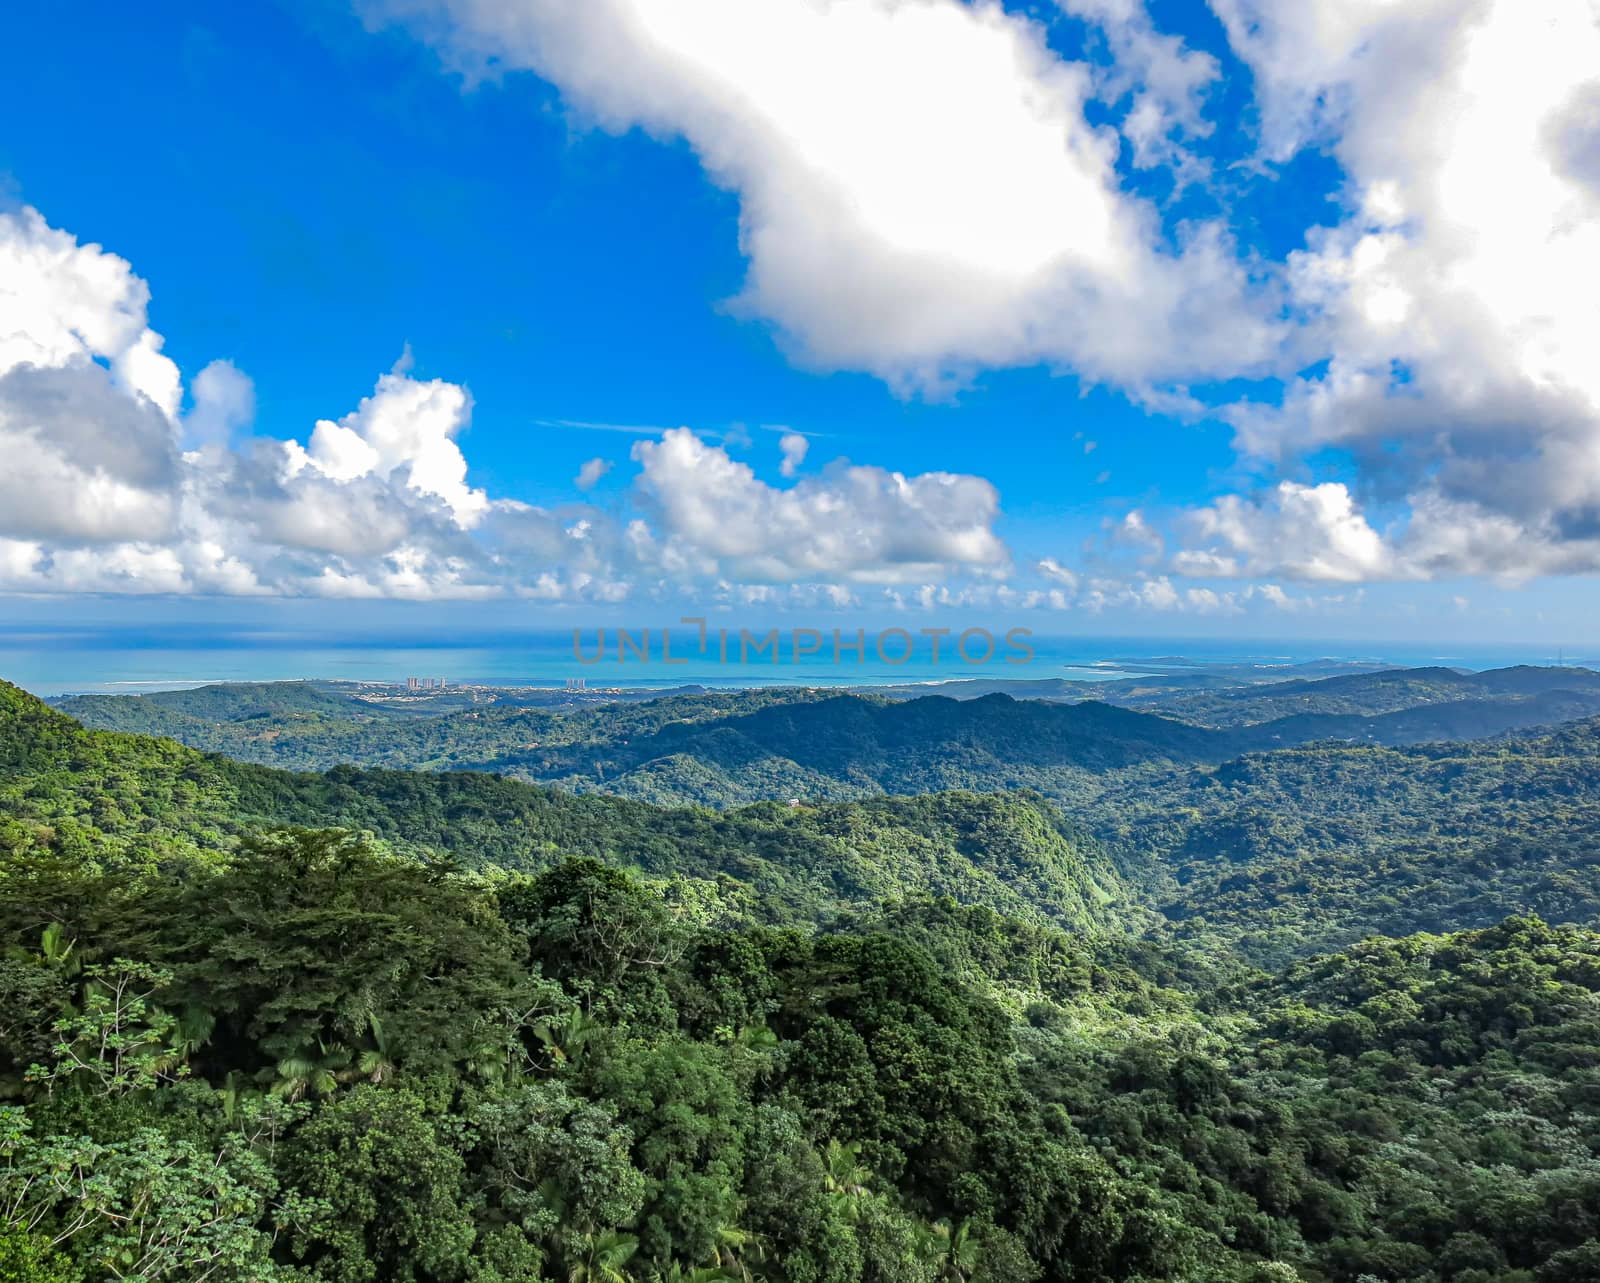 A beautiful aerial view of El Yunque National Rainforest in Puerto Rico.